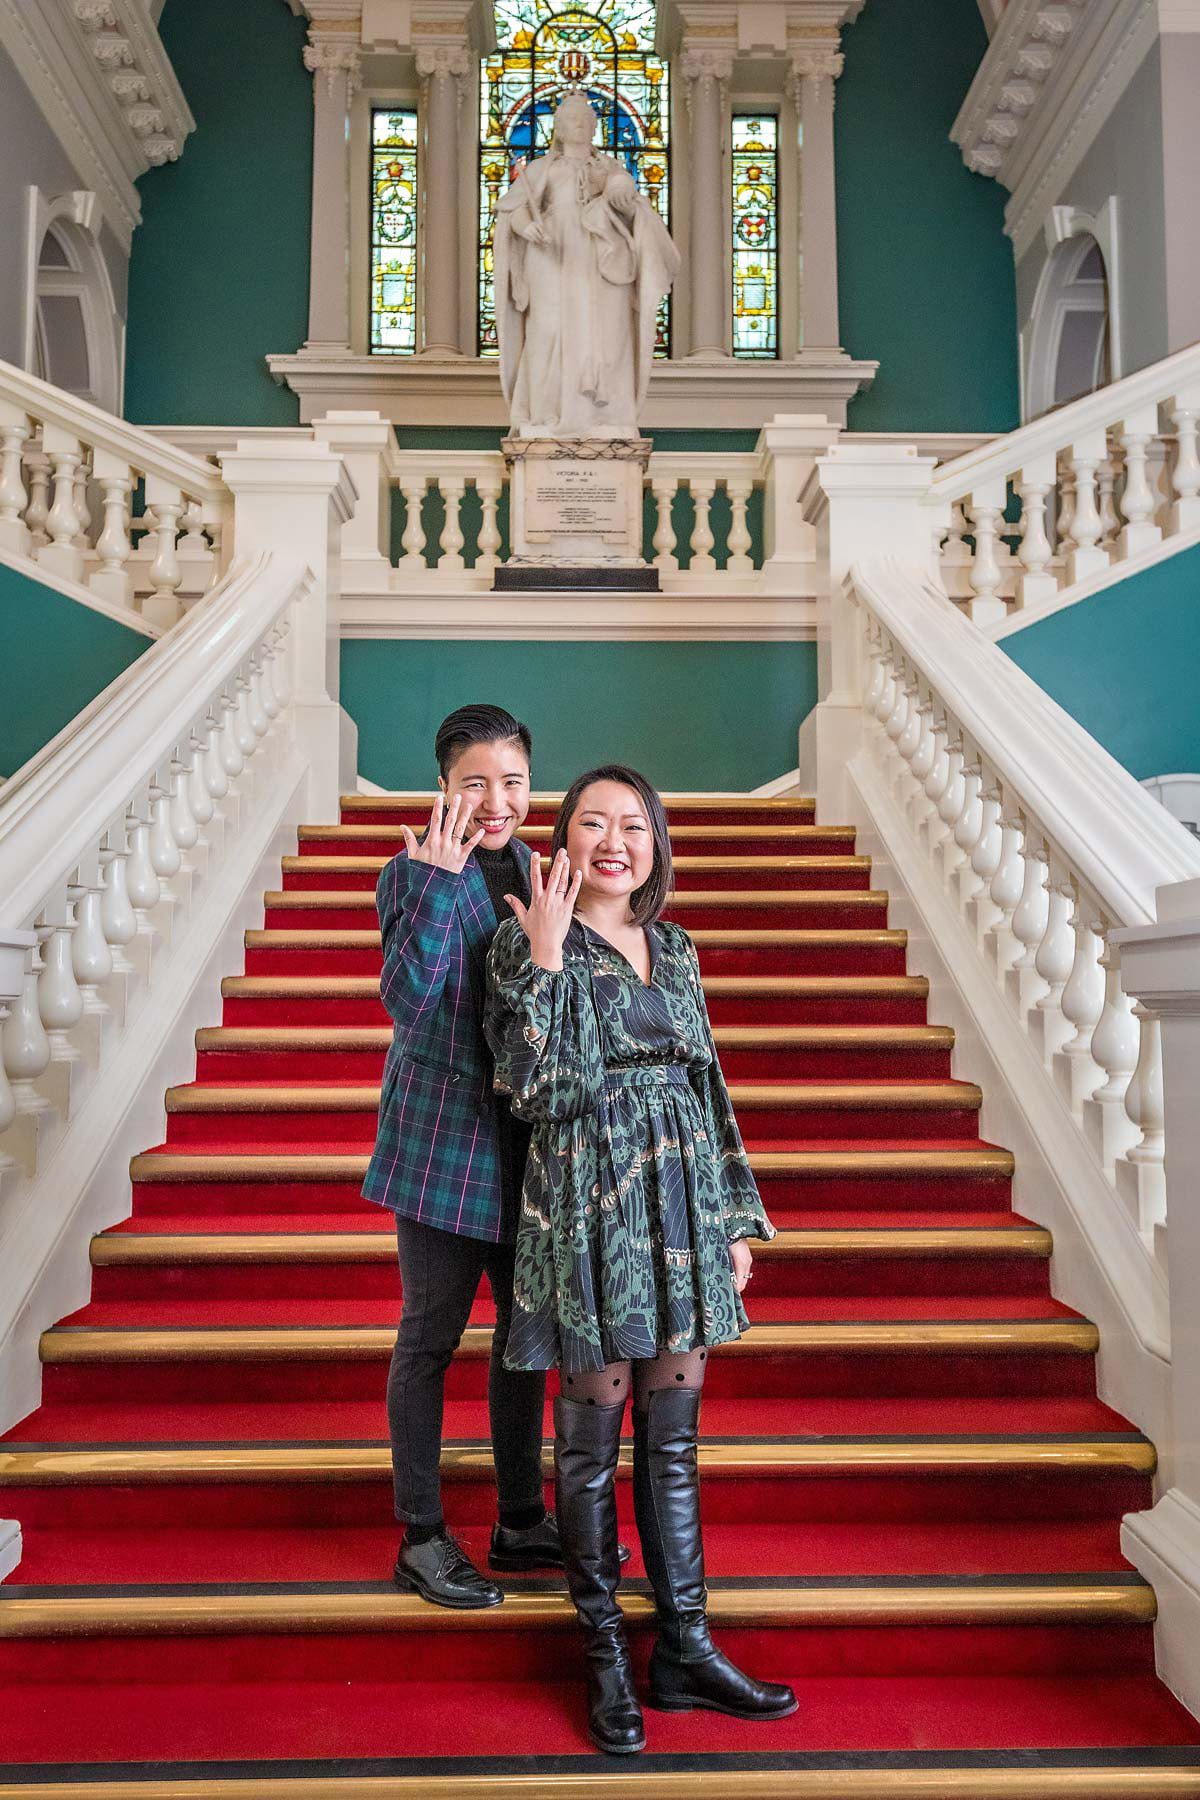 A female couple pose on the stairs of the Victoria Hall in Woolwich to show off their wedding rings.